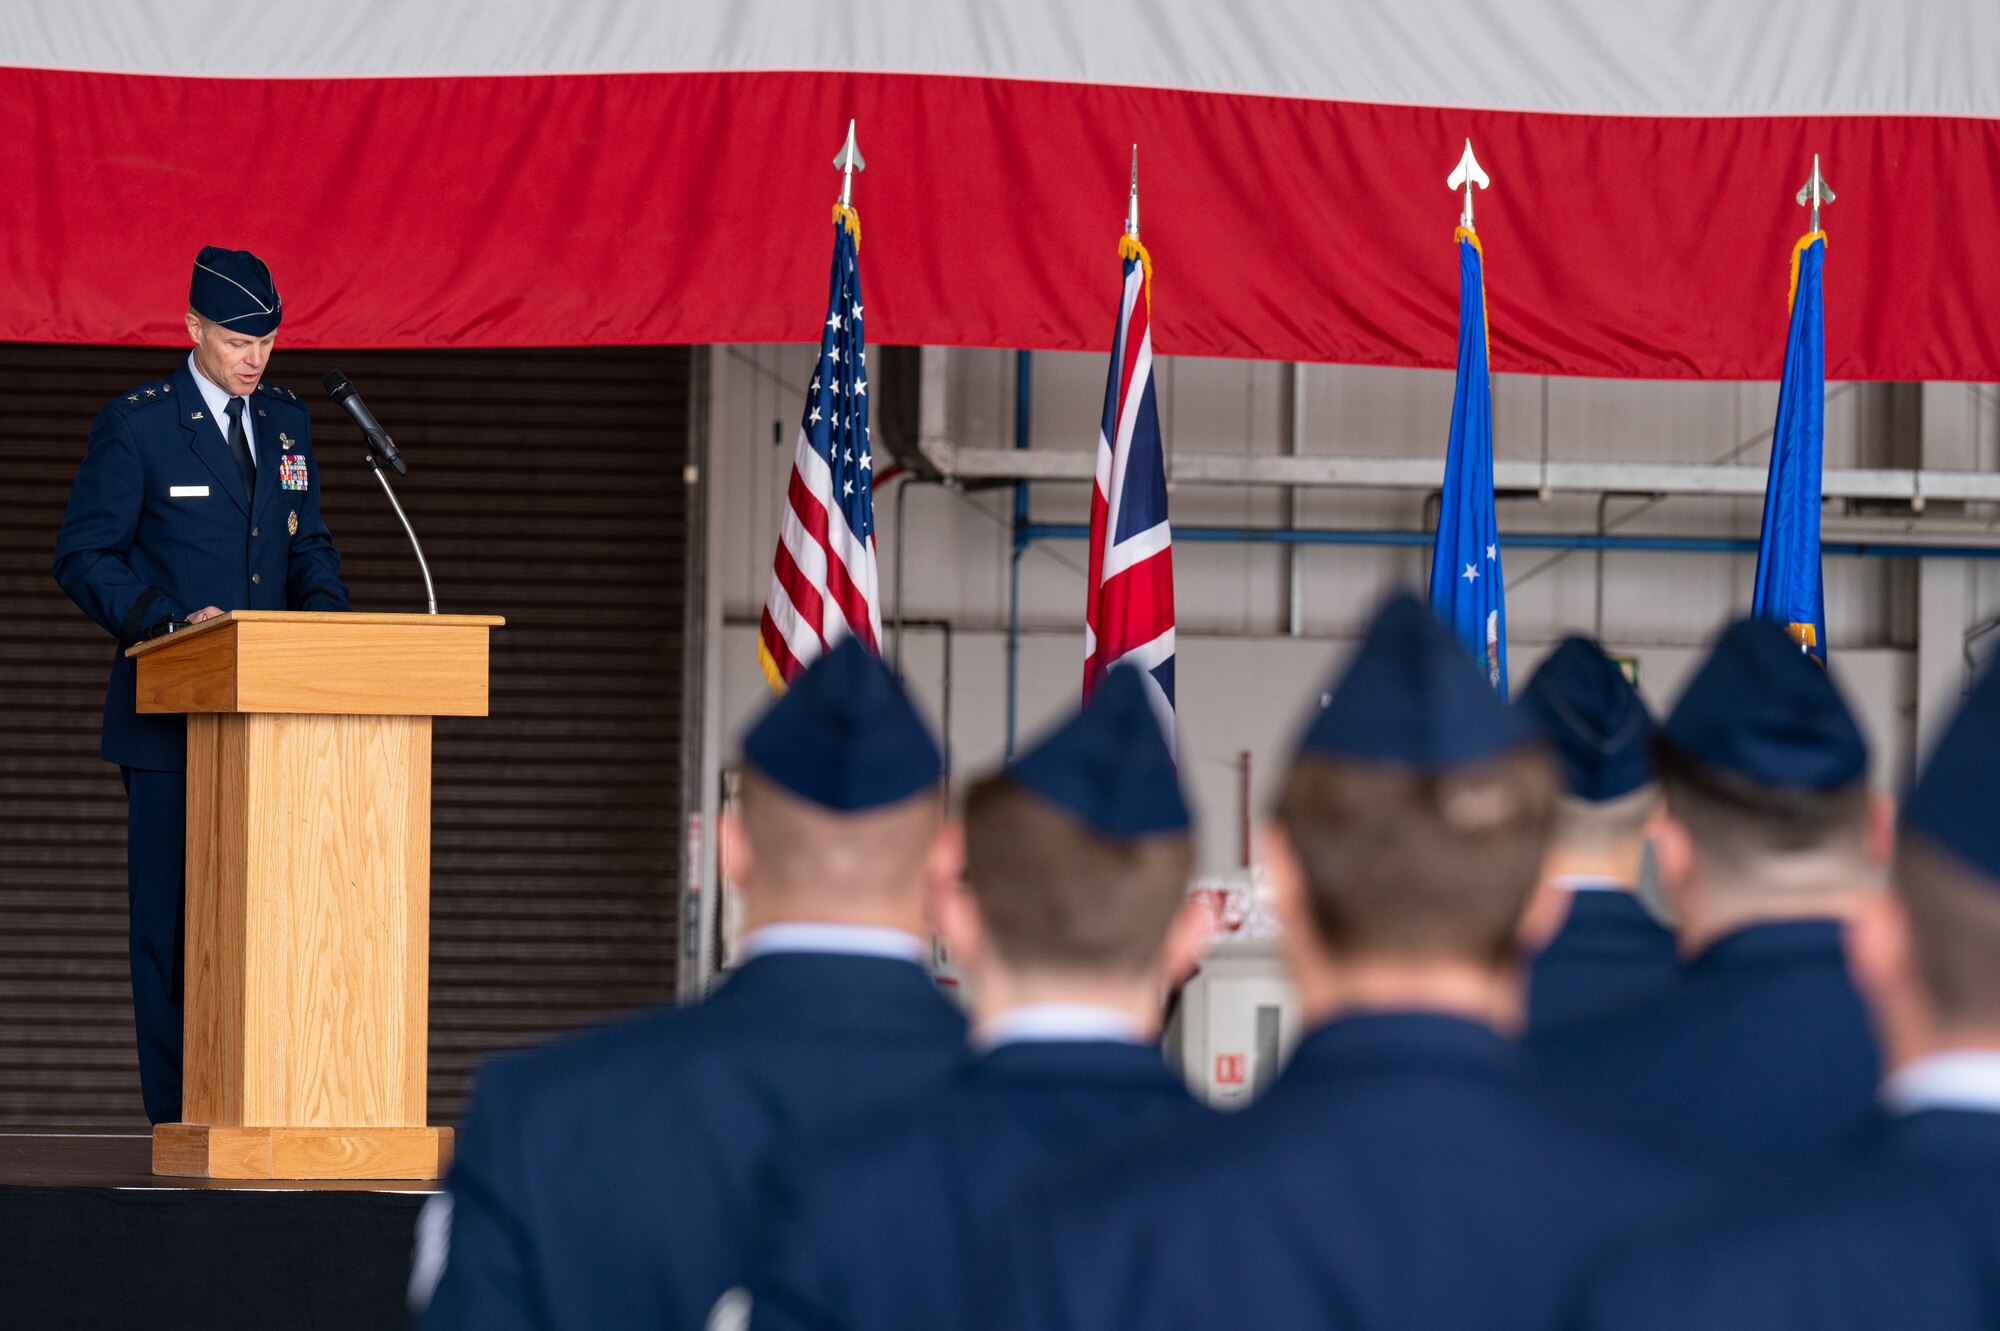 U.S. Air Force Maj. Gen. Derek France, 3rd Air Force commander, speaks to the audience about the achievements of Col. Gene Jacobus during the 100th Air Refueling Wing change of command ceremony at Royal Air Force Mildenhall, England, July 17, 2023.